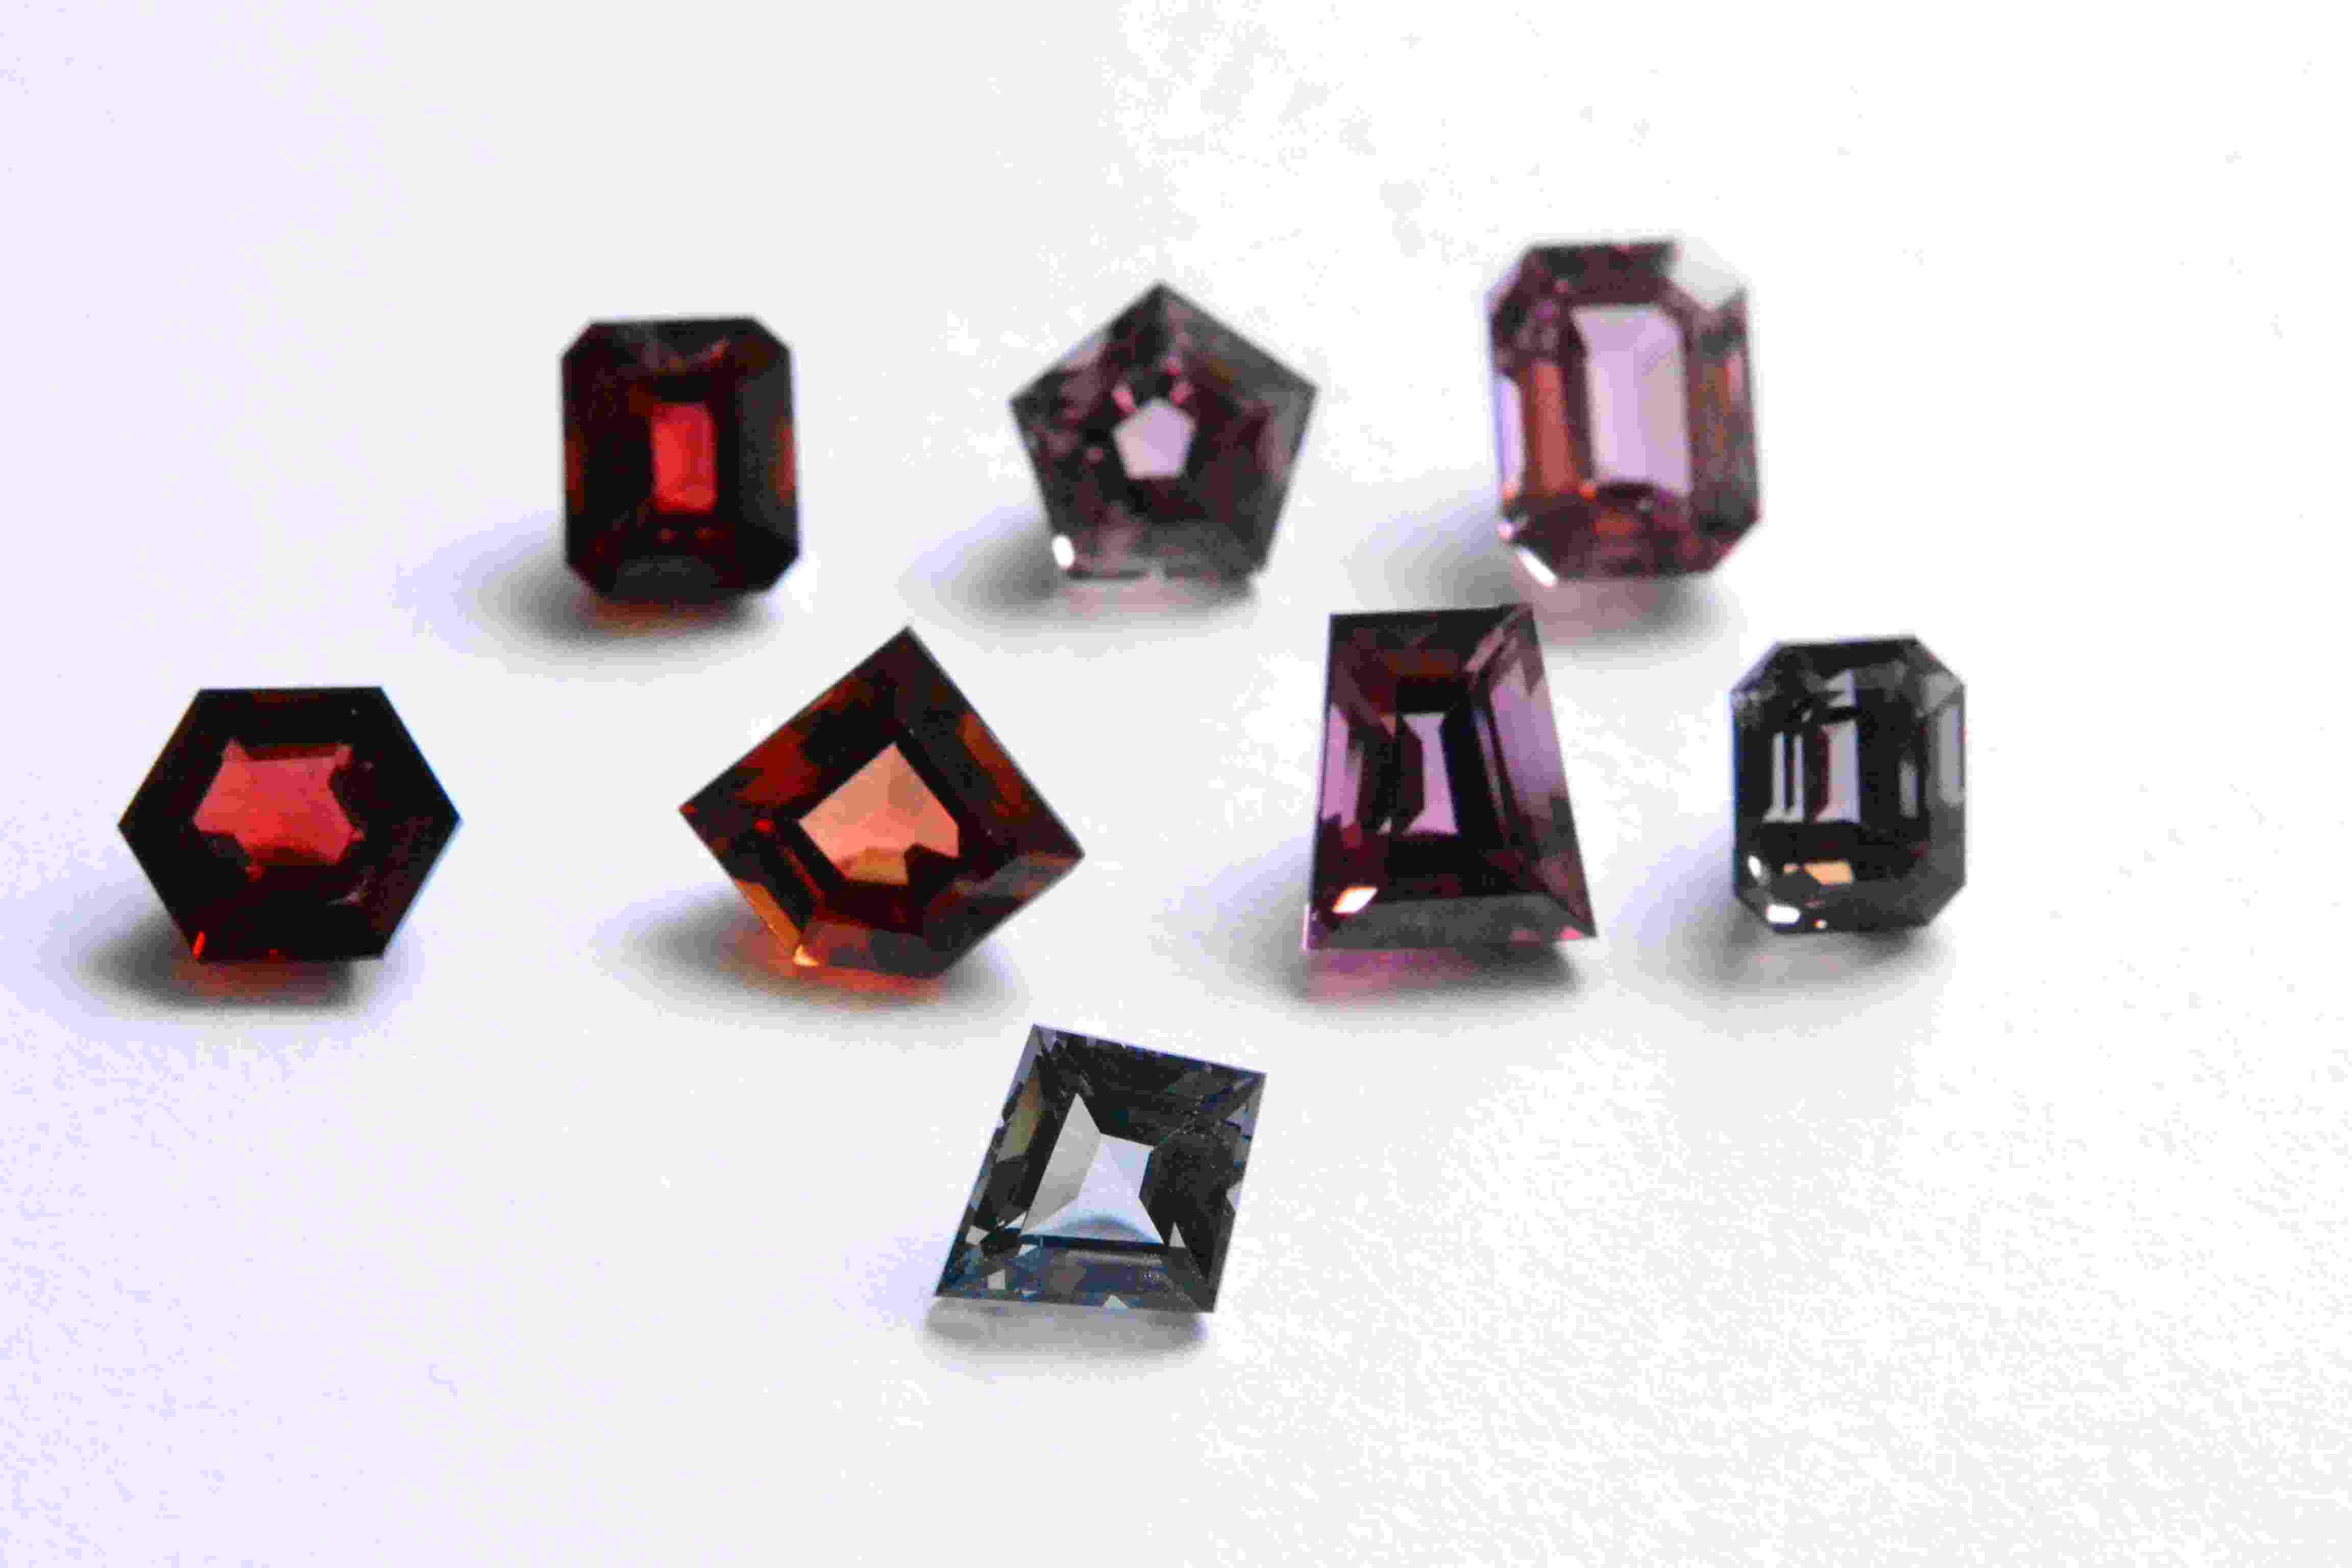 Different Cuts of Spinels